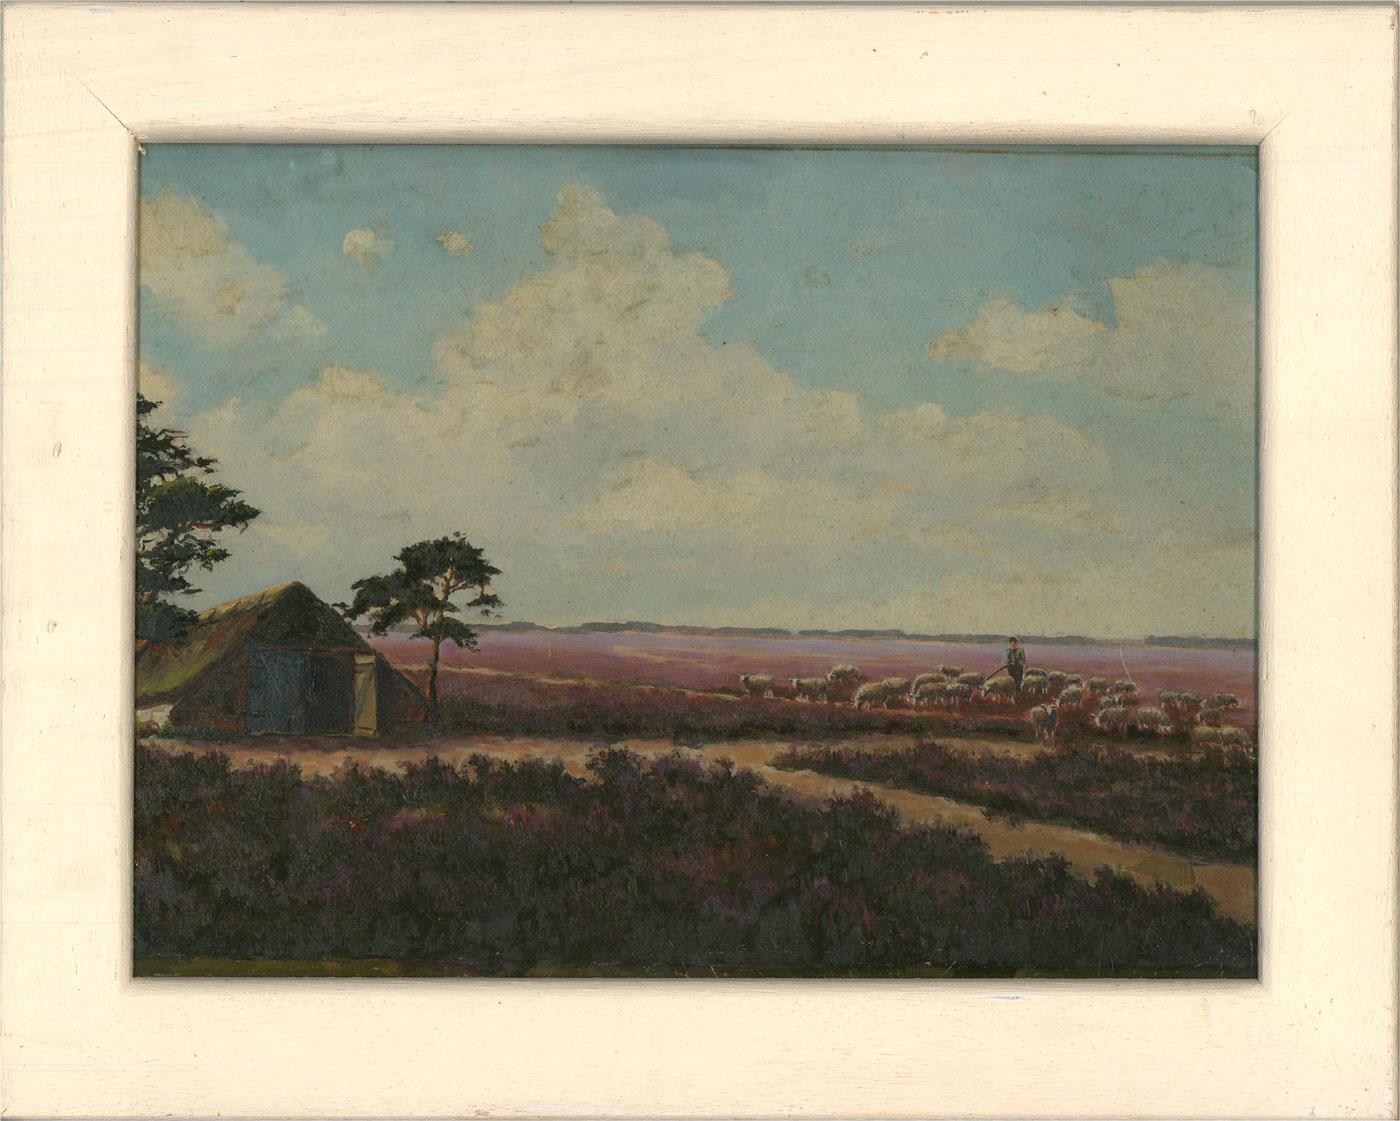 Unknown Landscape Painting - 1977 Oil - The Artist's Wife